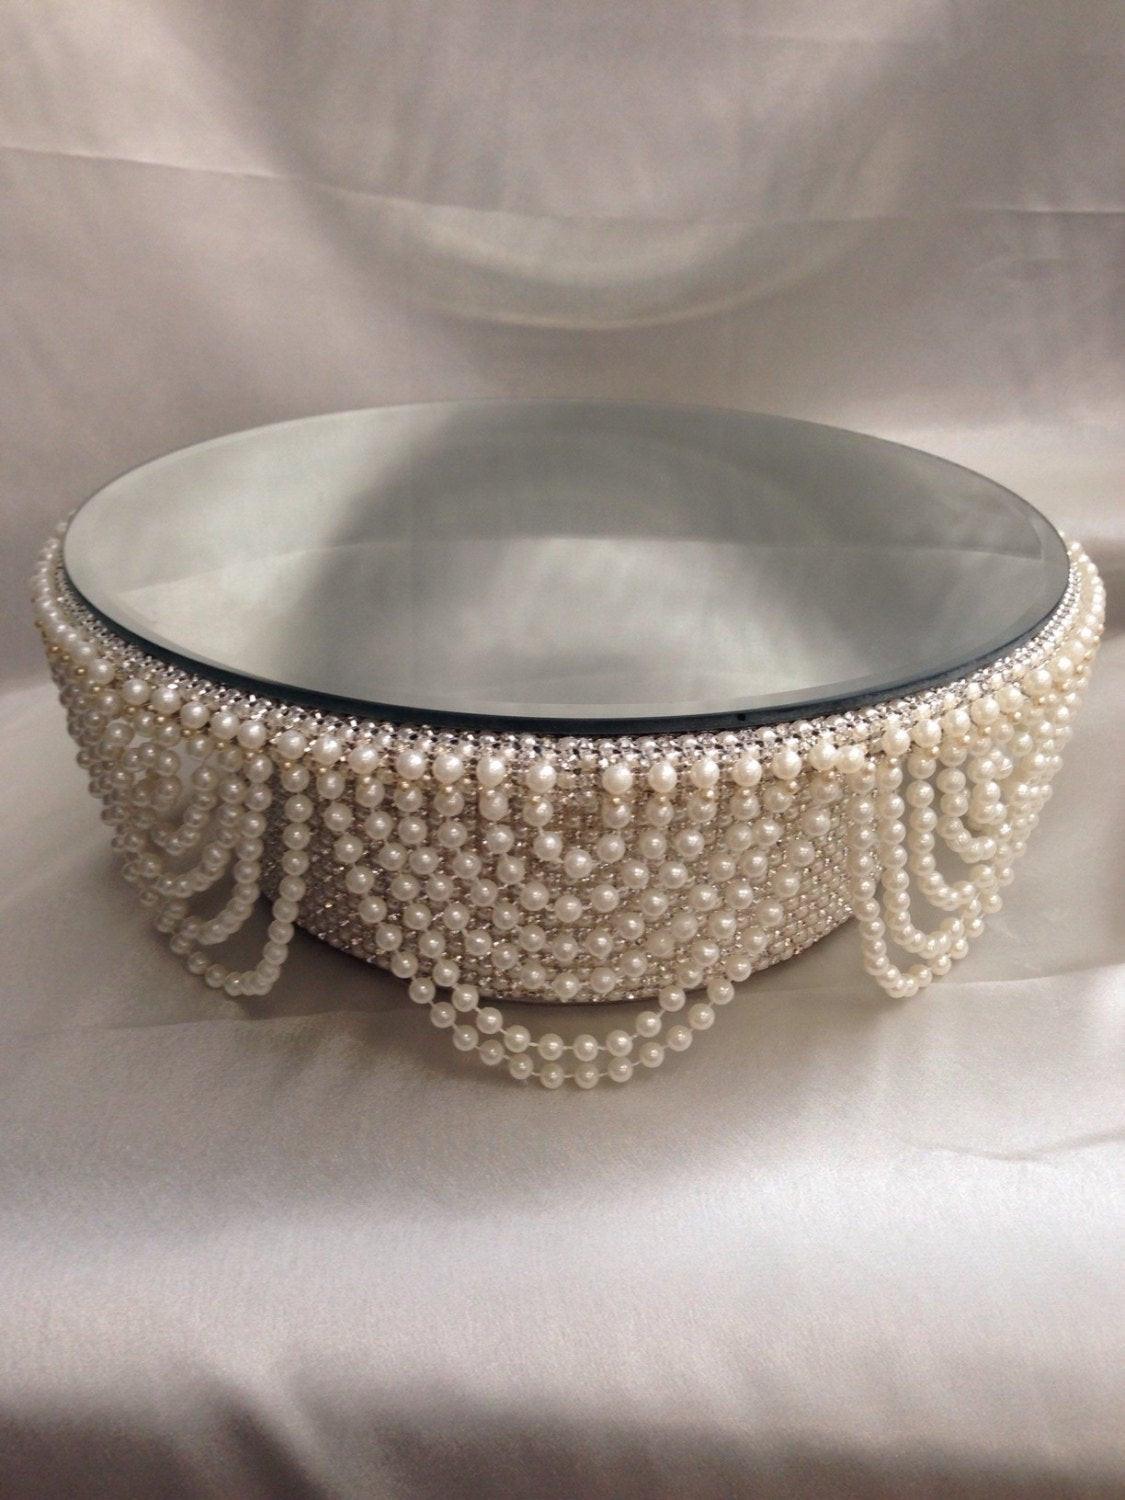 Wedding Cake Plate
 Pearl and crystals Drape design wedding cake stand round